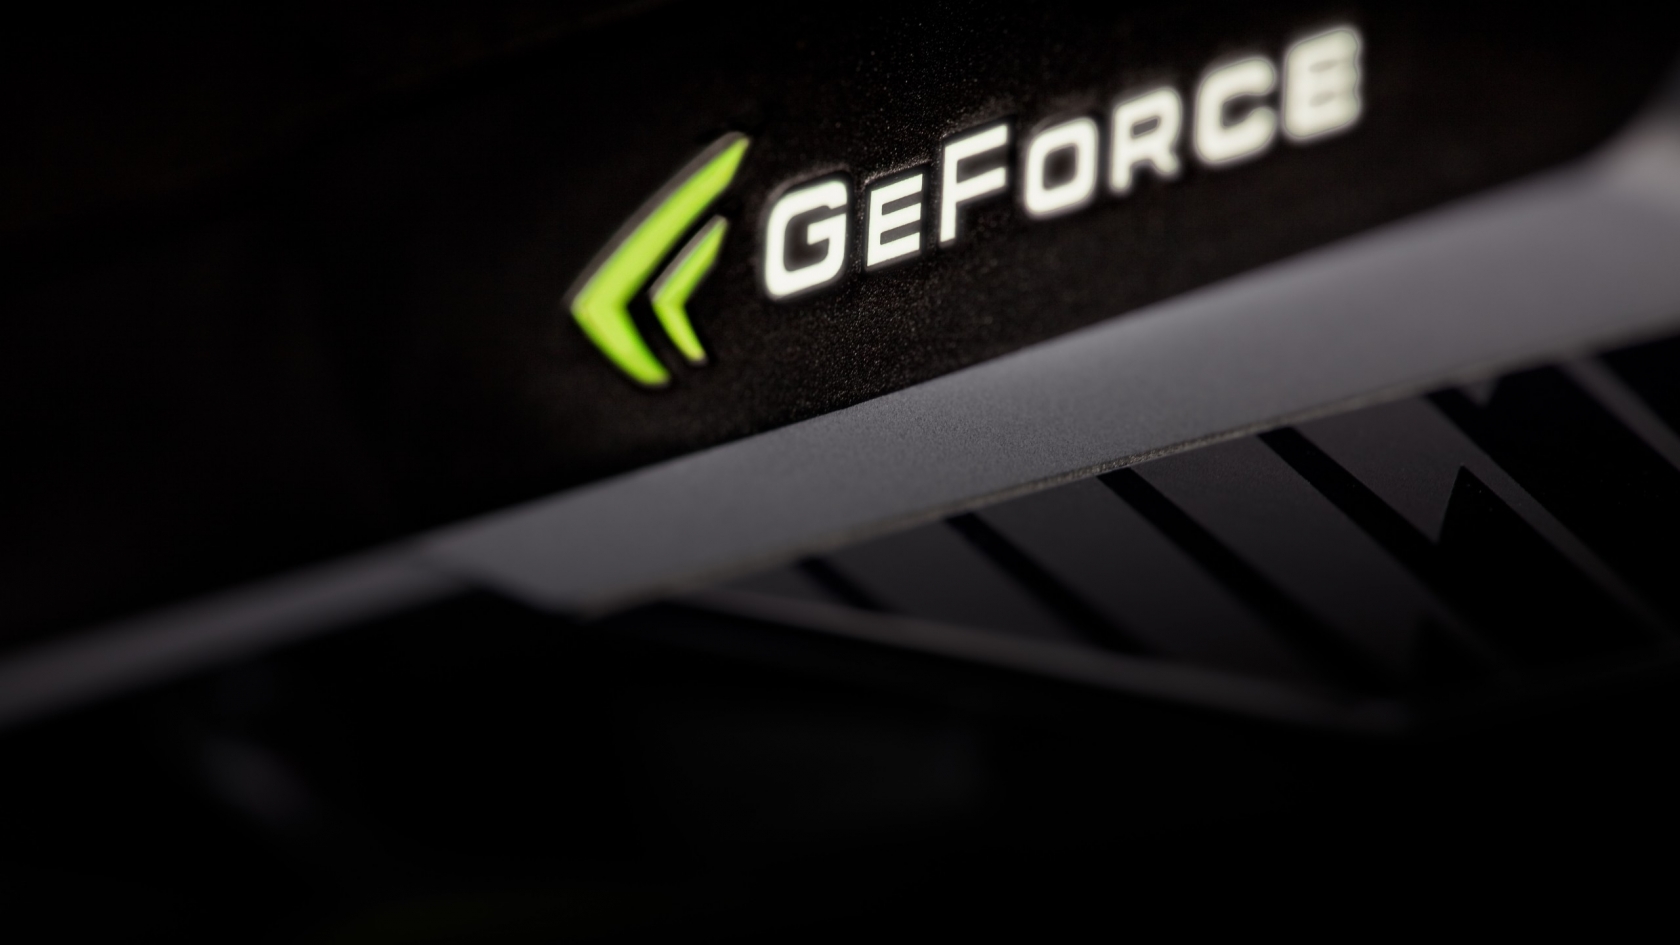 GeForce Graphics for 1680 x 945 HDTV resolution